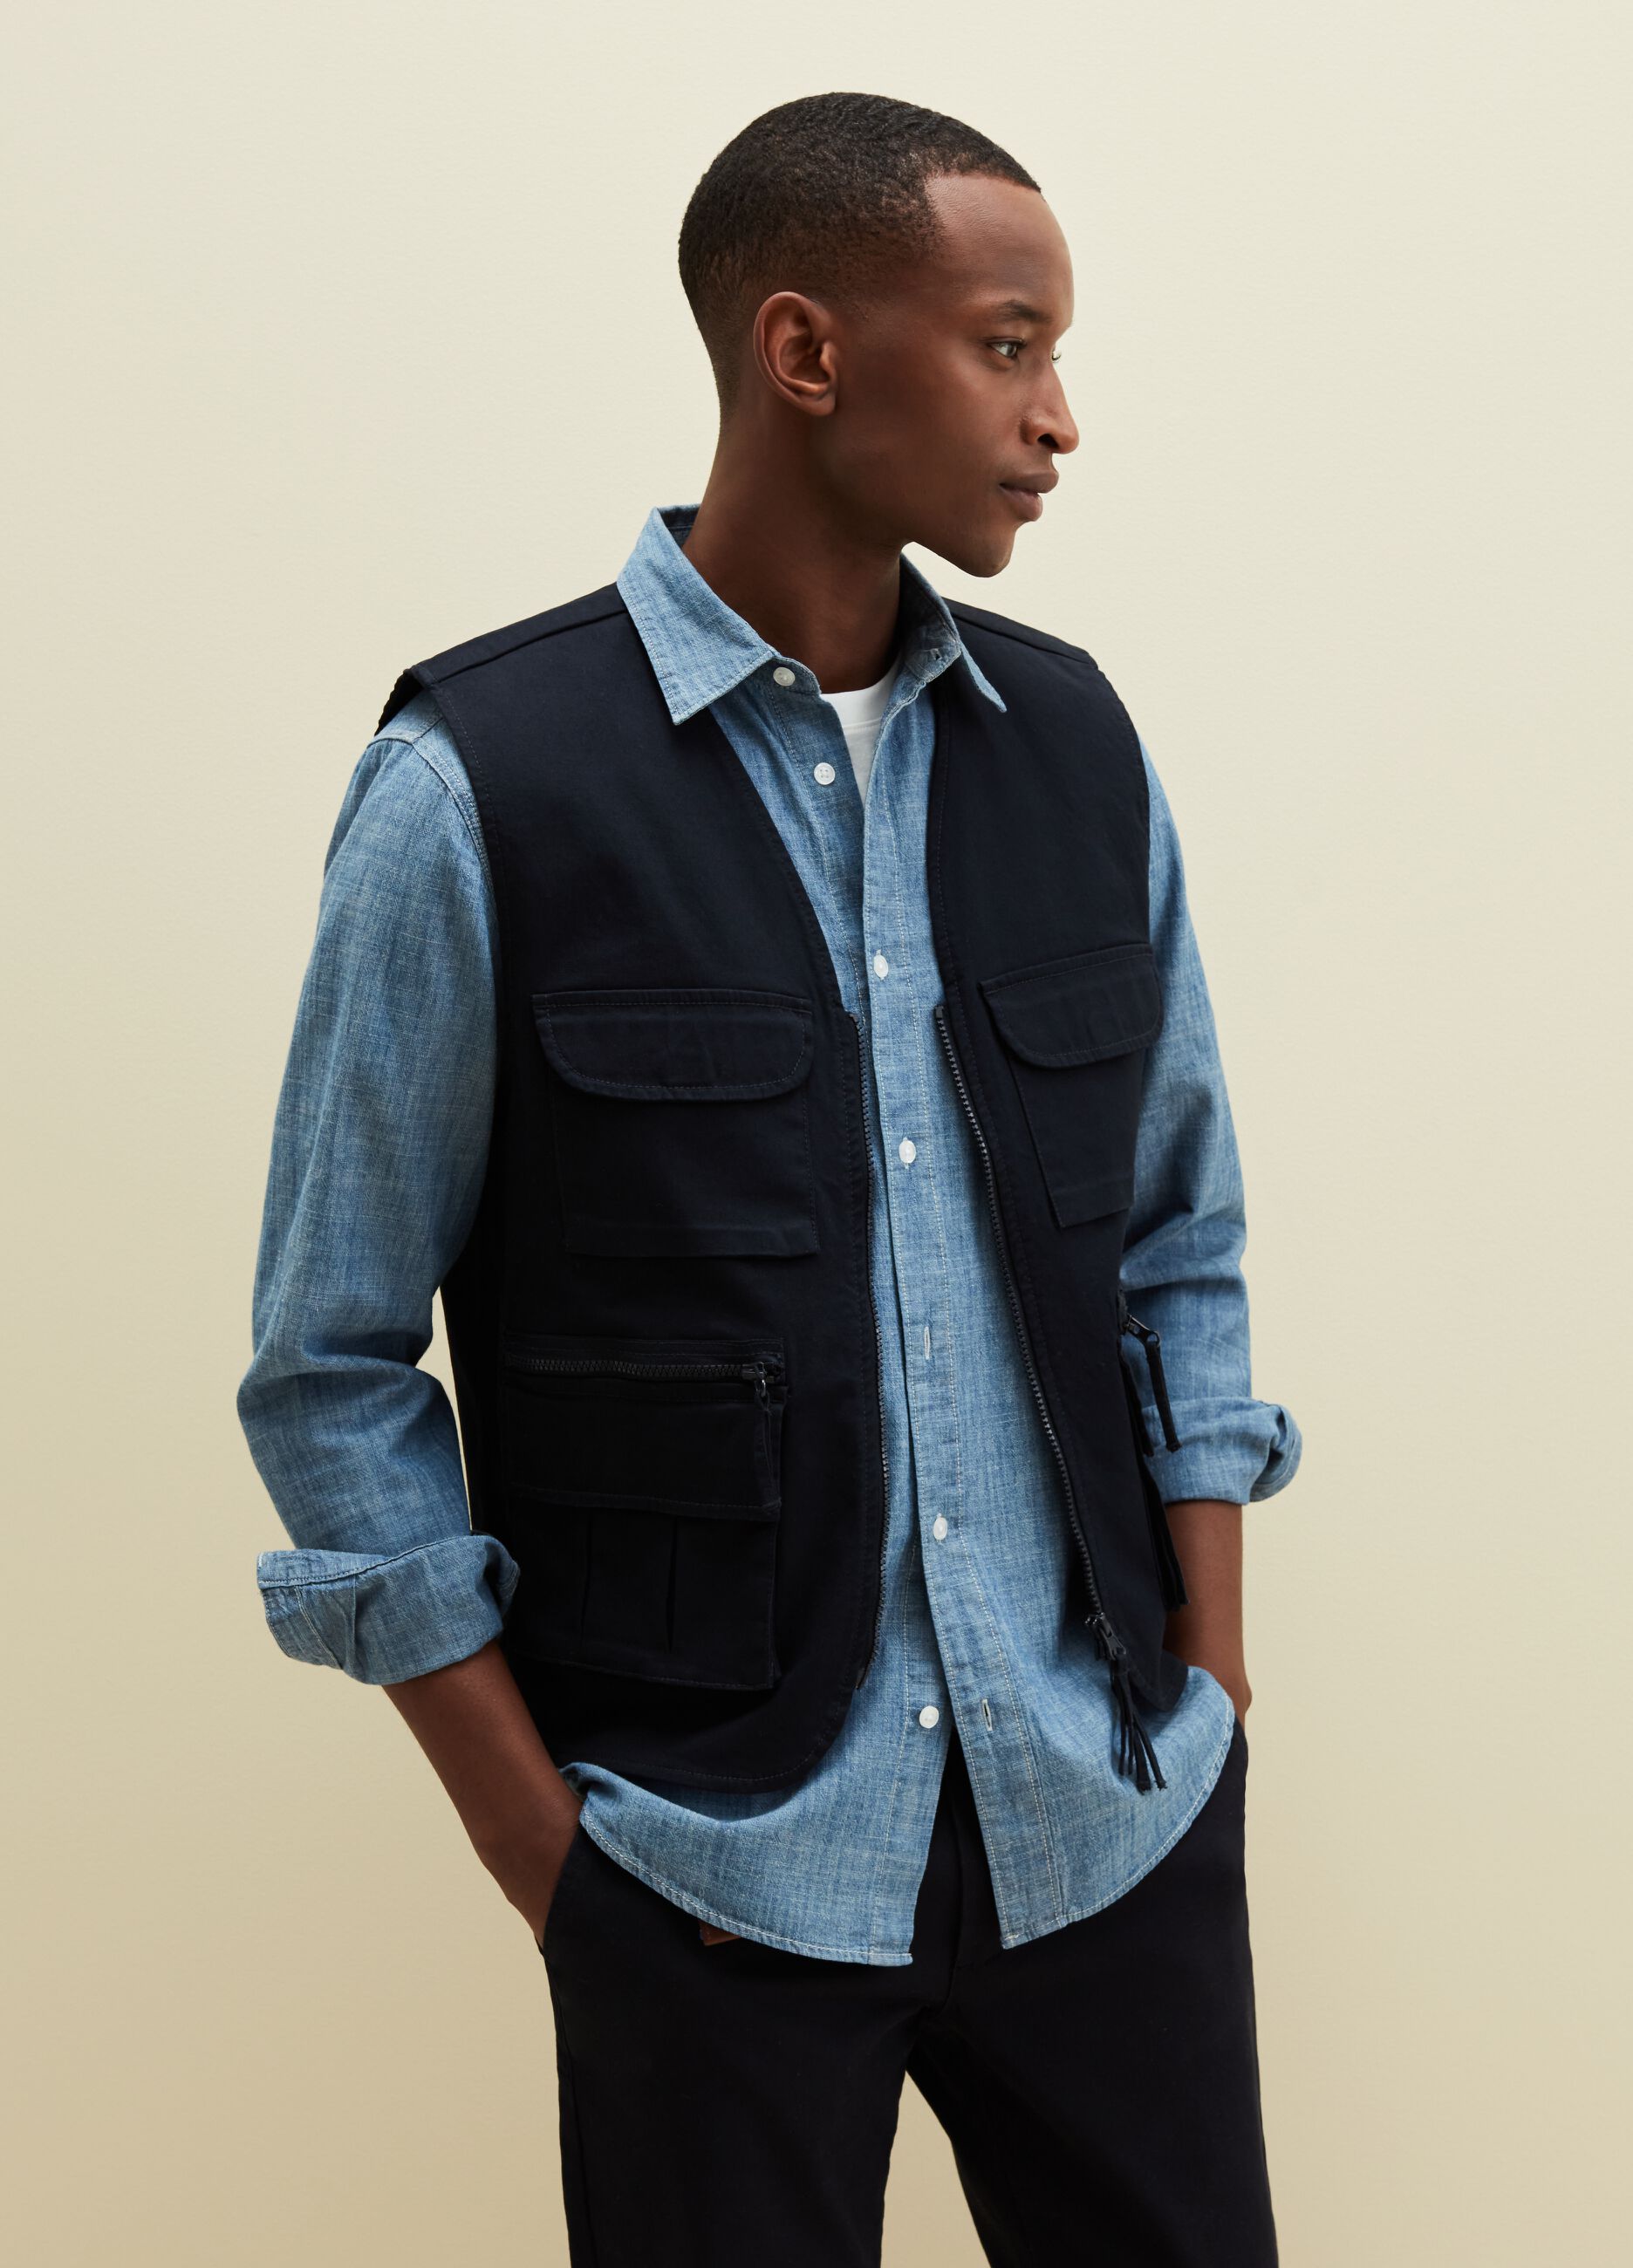 Full-zip gilet with pockets